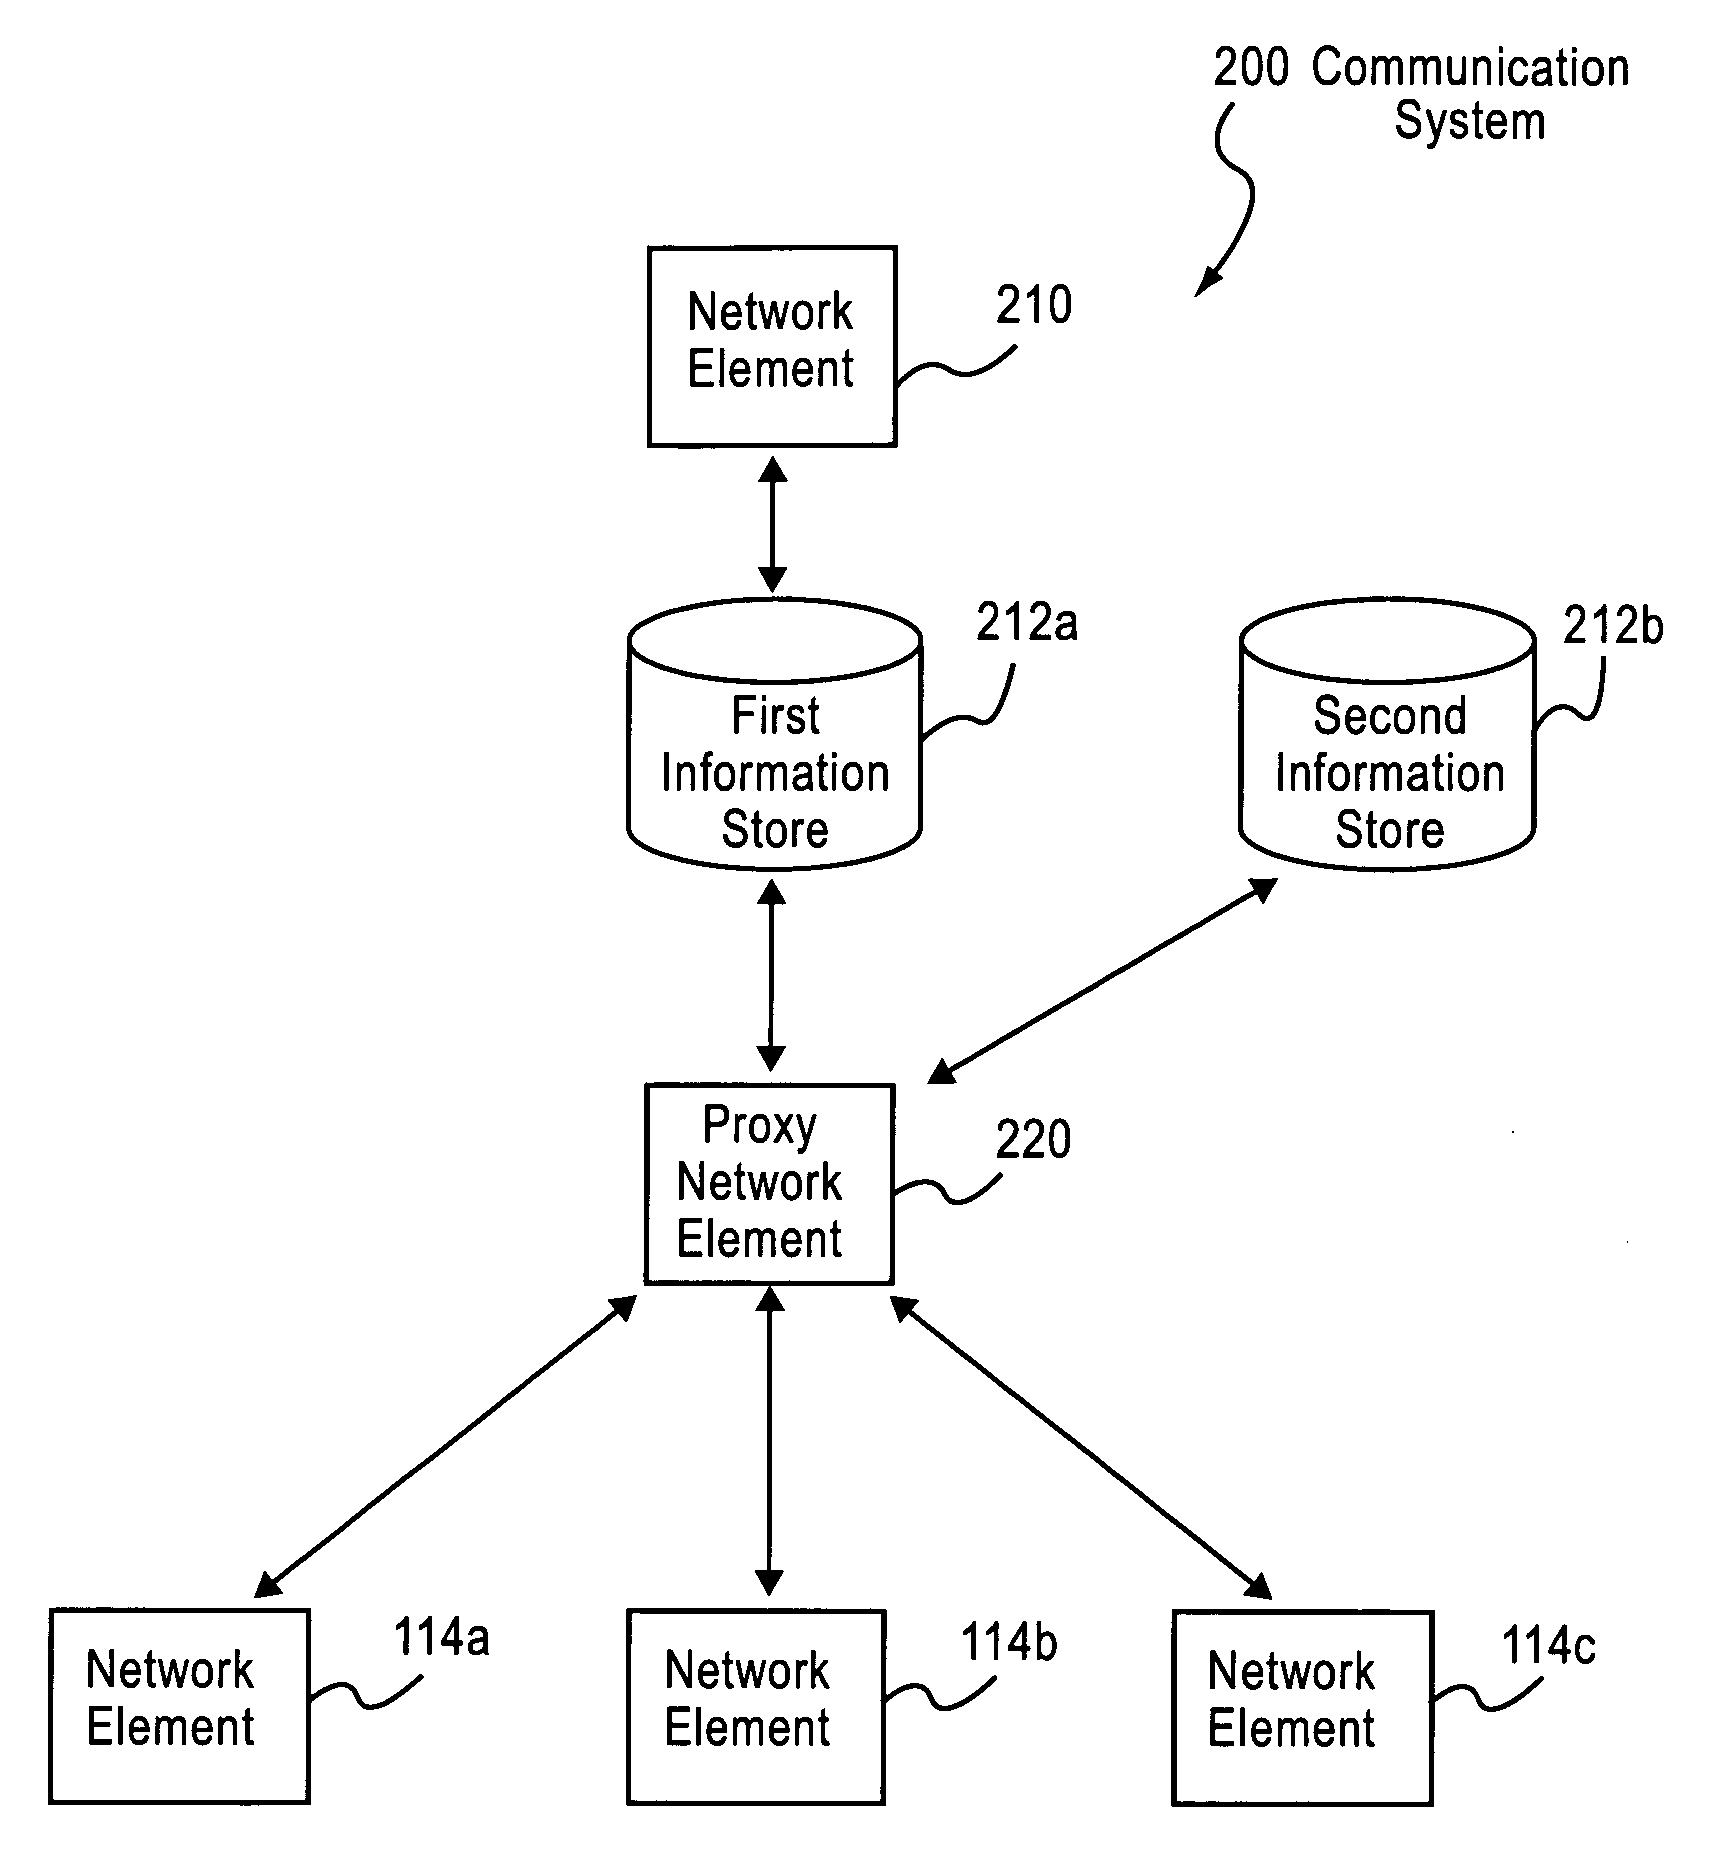 Controlling access to services in a communications system